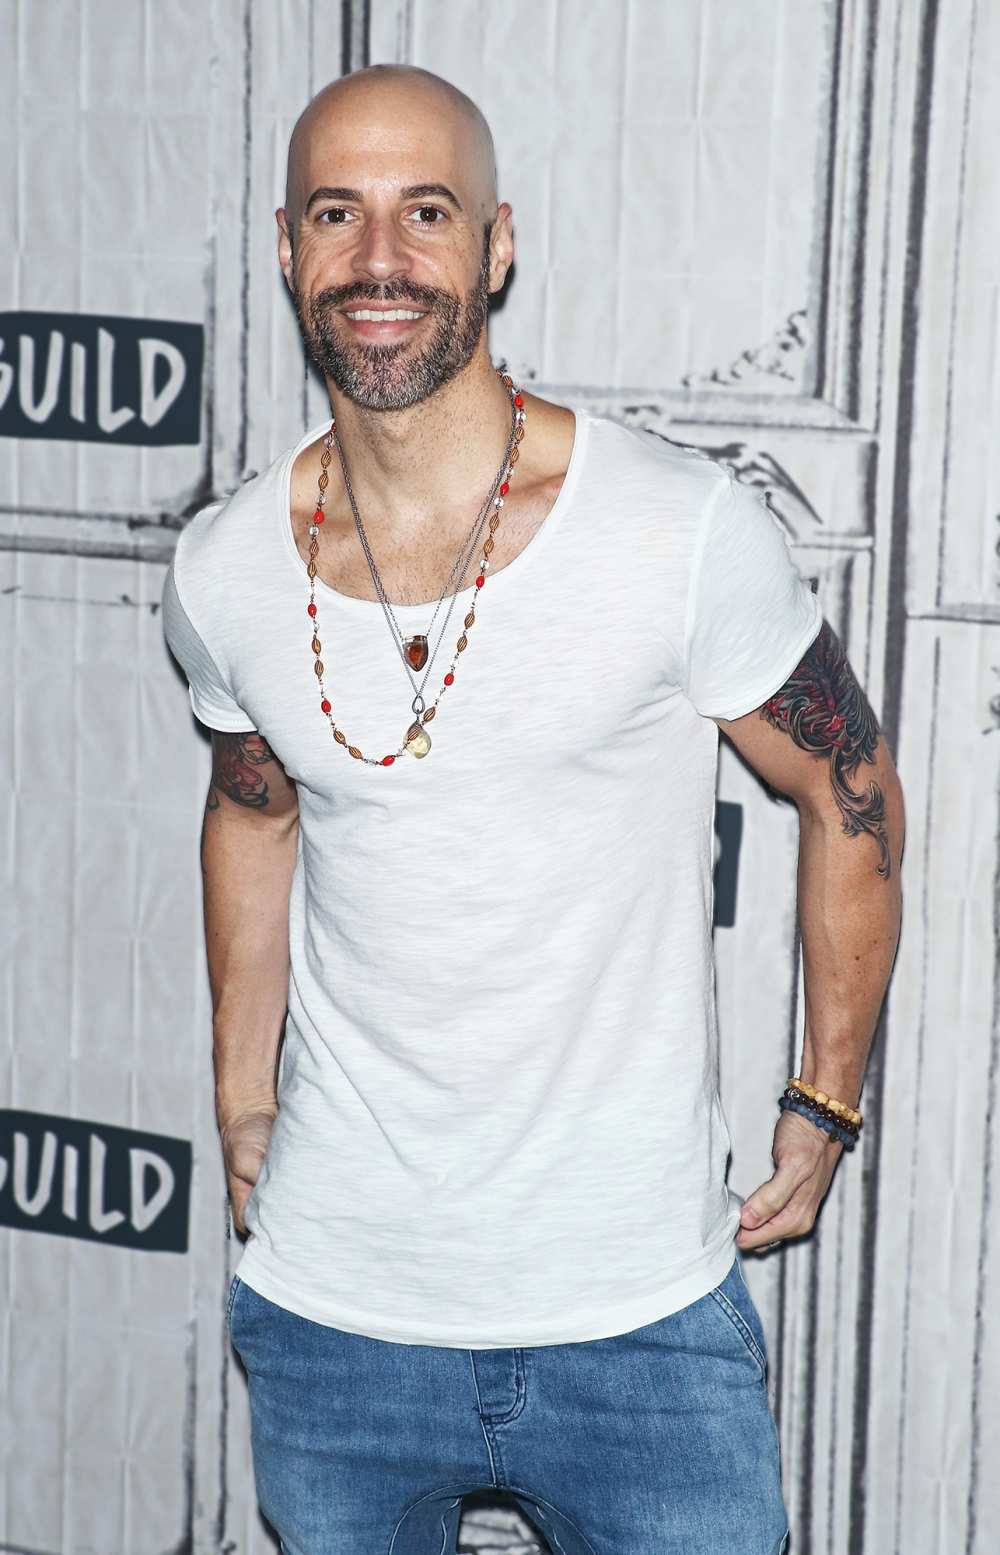 Chris Daughtry Shares His Beats for the Heat: See His Playlist!